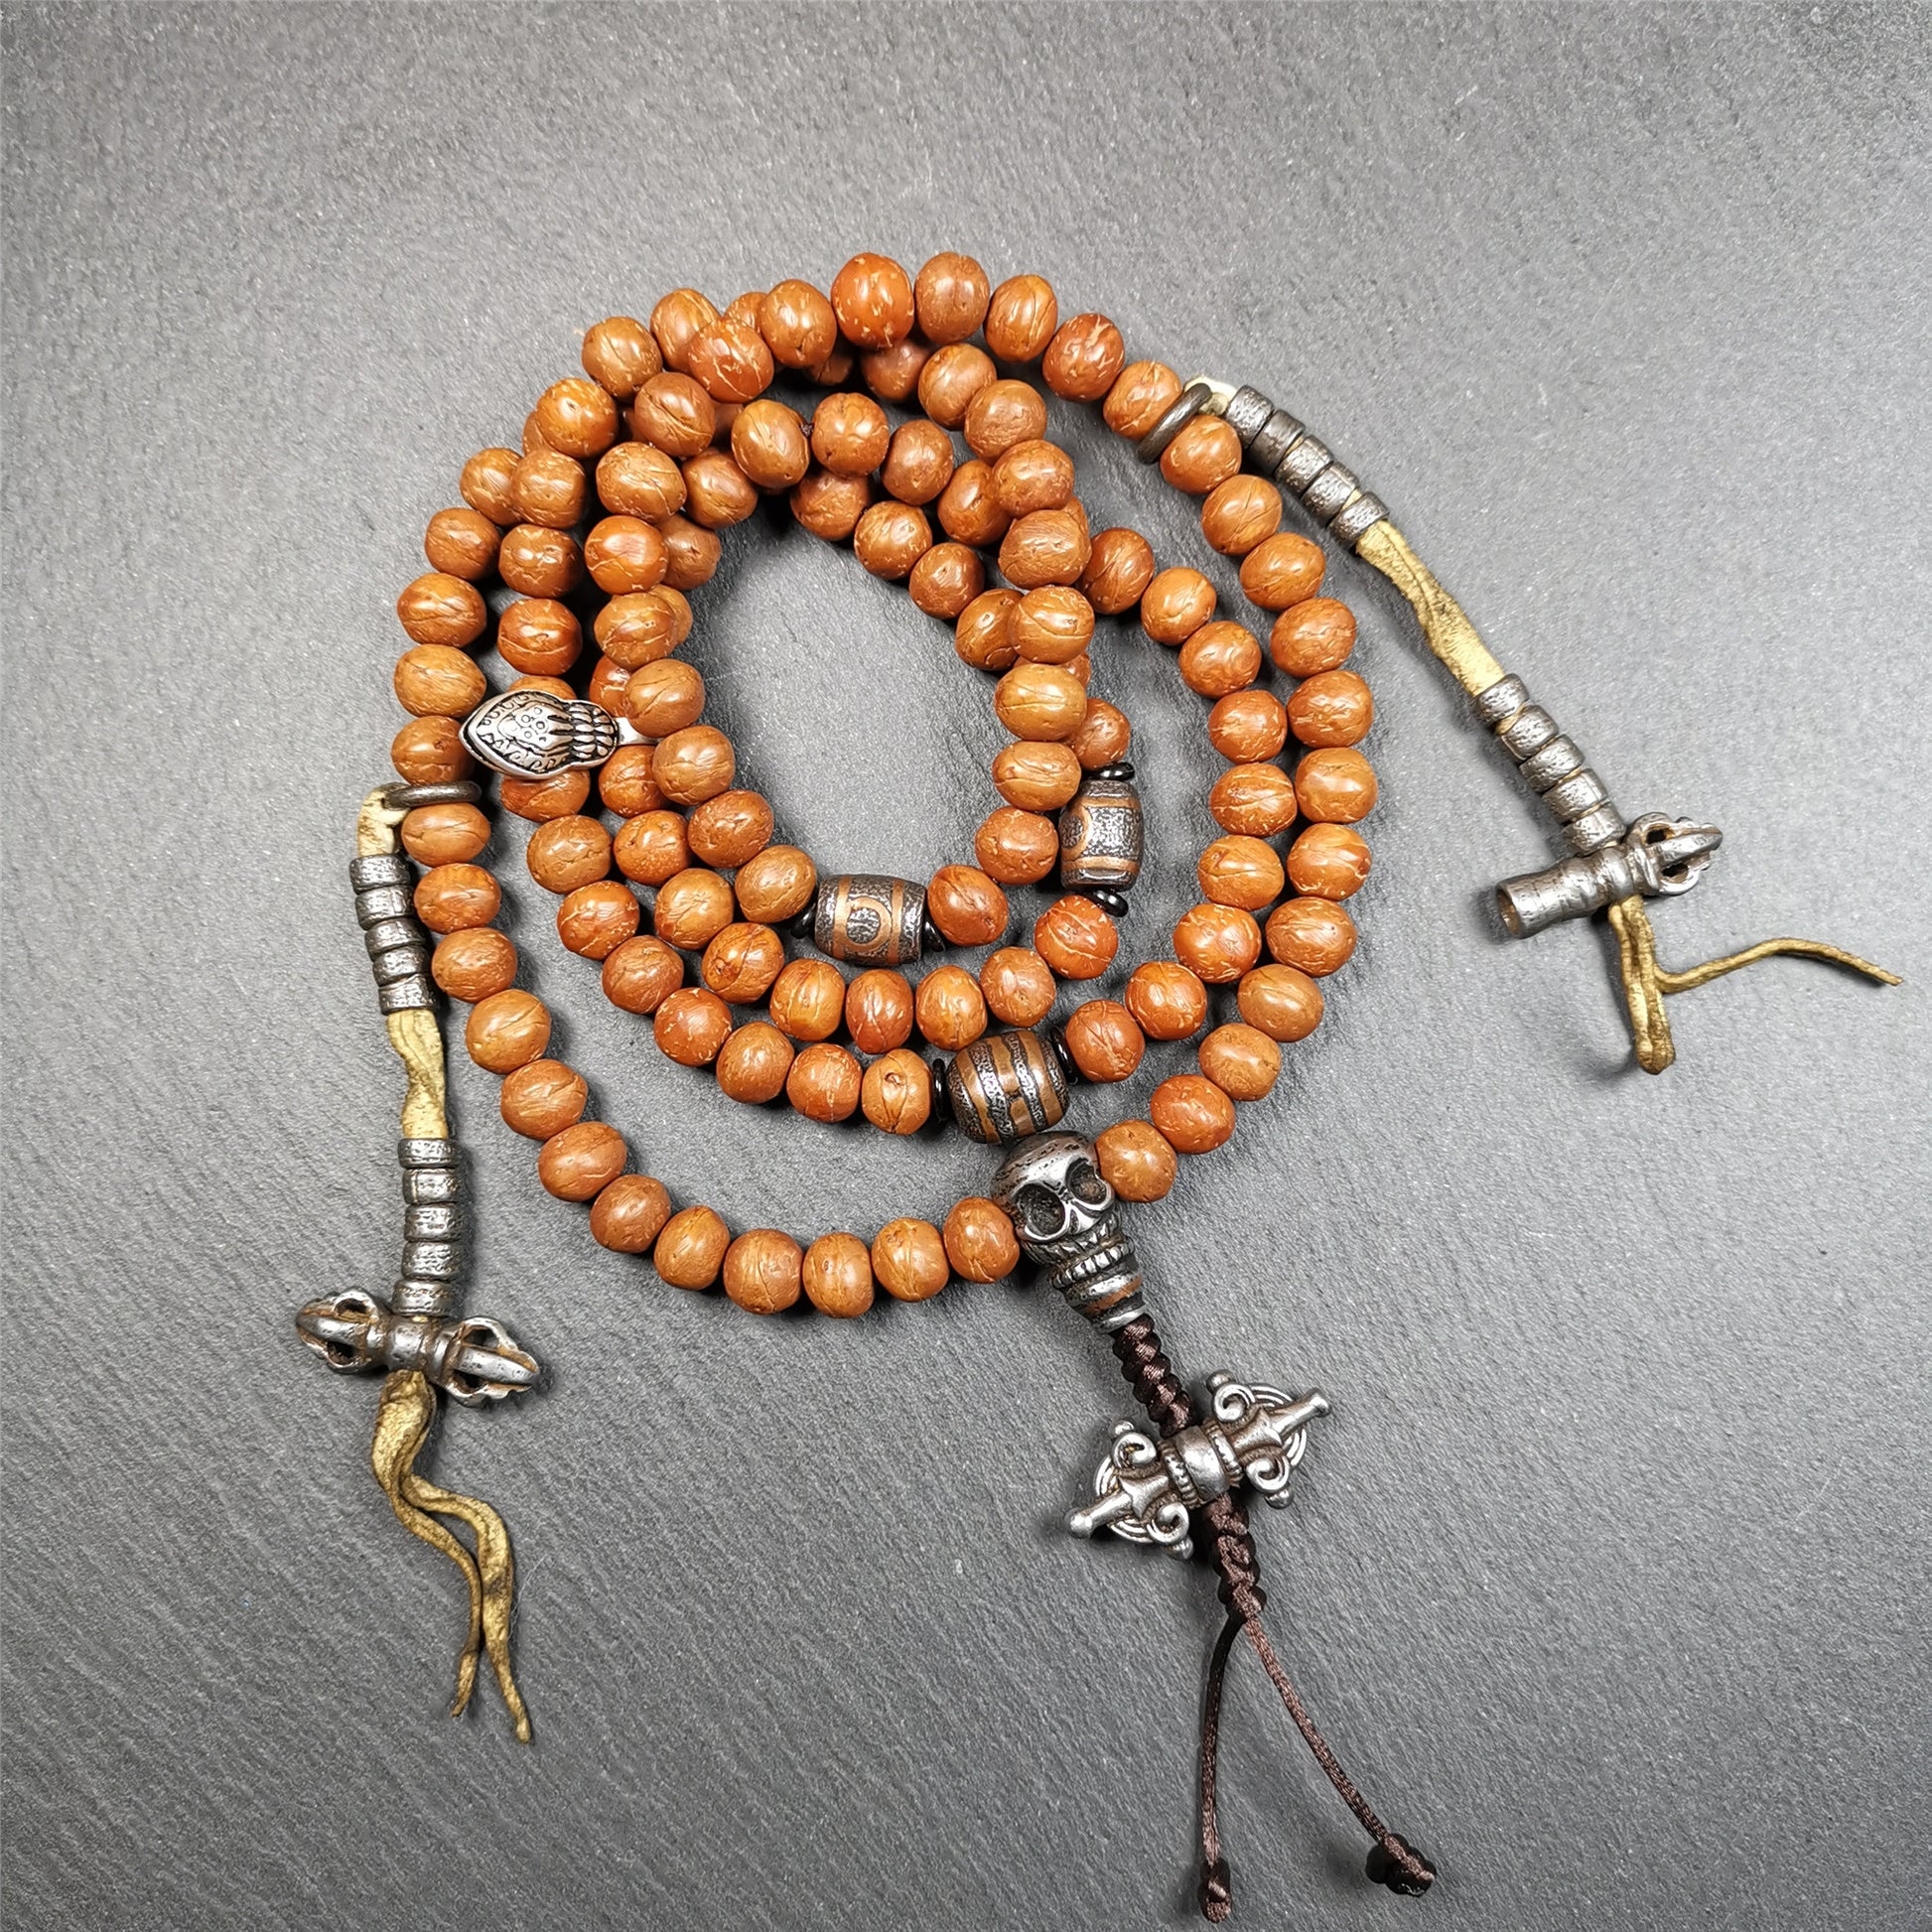 This bodhi beads mala is made by Tibetan craftsmen and come from Hepo Town, Baiyu County, the birthplace of the famous Tibetan handicrafts,about 30 years old, hold and blessed by a lama in Baiyu Monastery.  It is composed of 108 bodhi seed beads, and is equipped with 3 cold iron dzi beads, cold iron bead counters are installed on both sides, 1 mani jewel bead clip,and finally consists a skull guru bead and vajra on the end, very elegant.